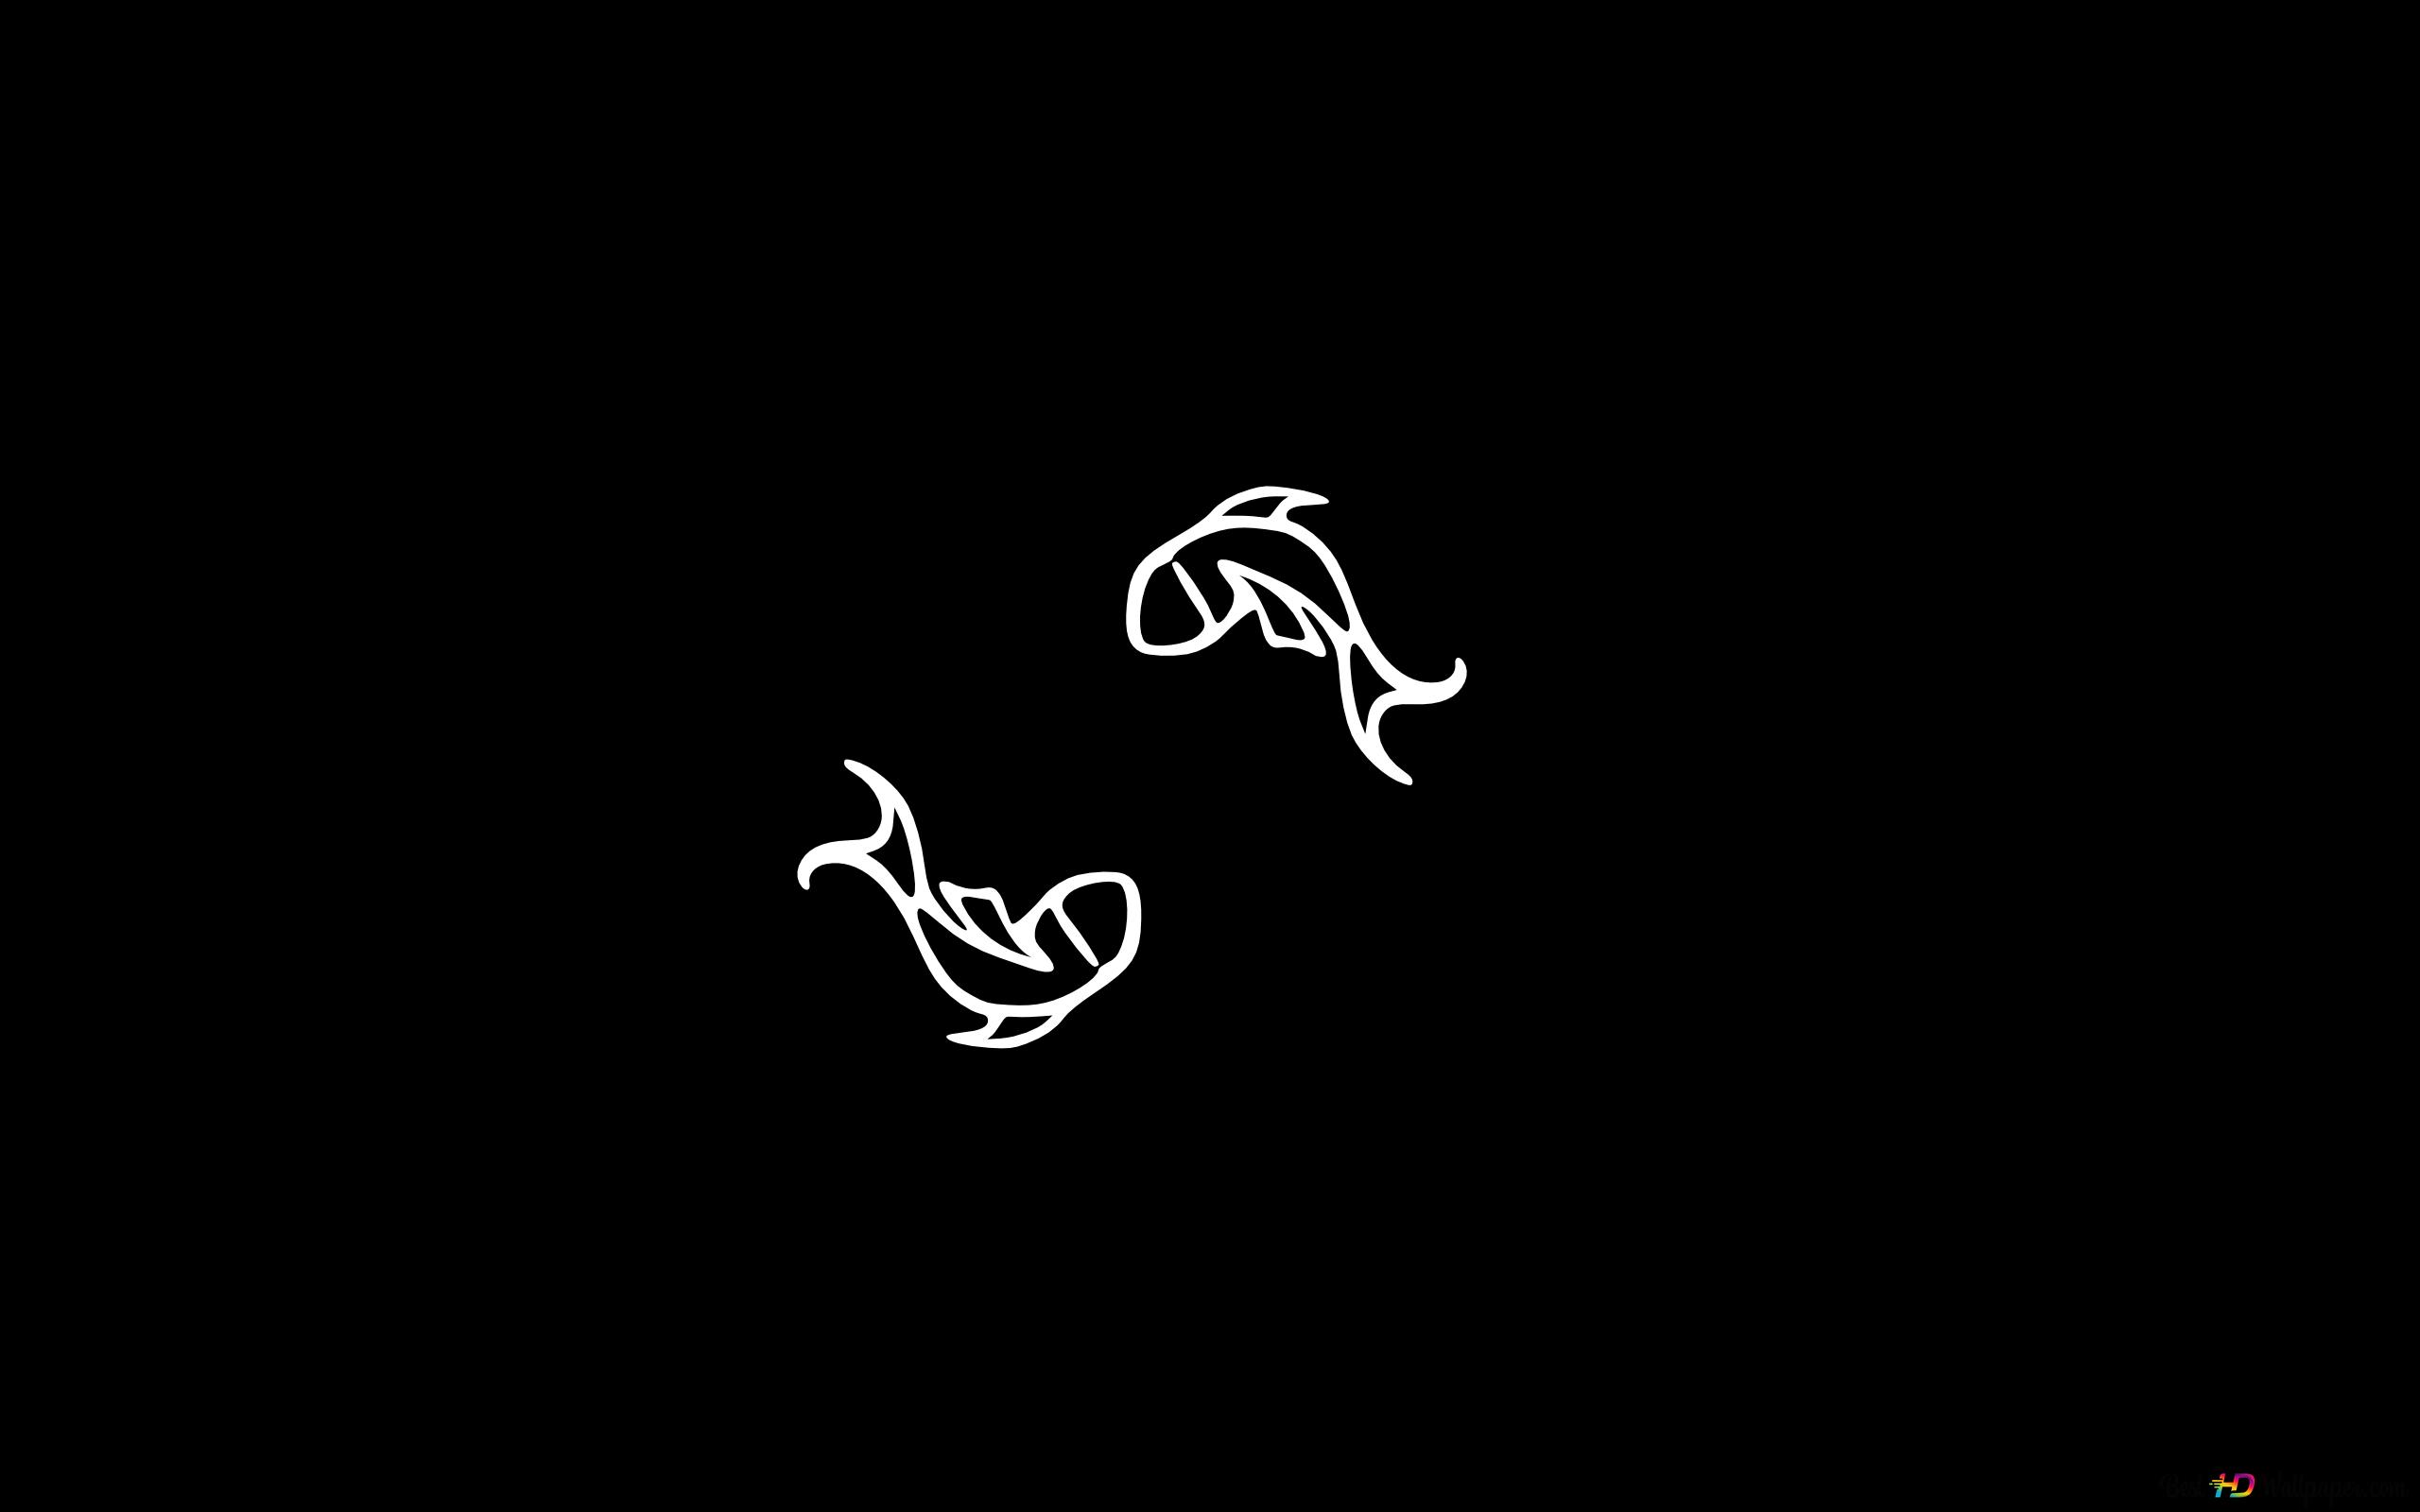 White fish on black background representing pisces 2K wallpaper download